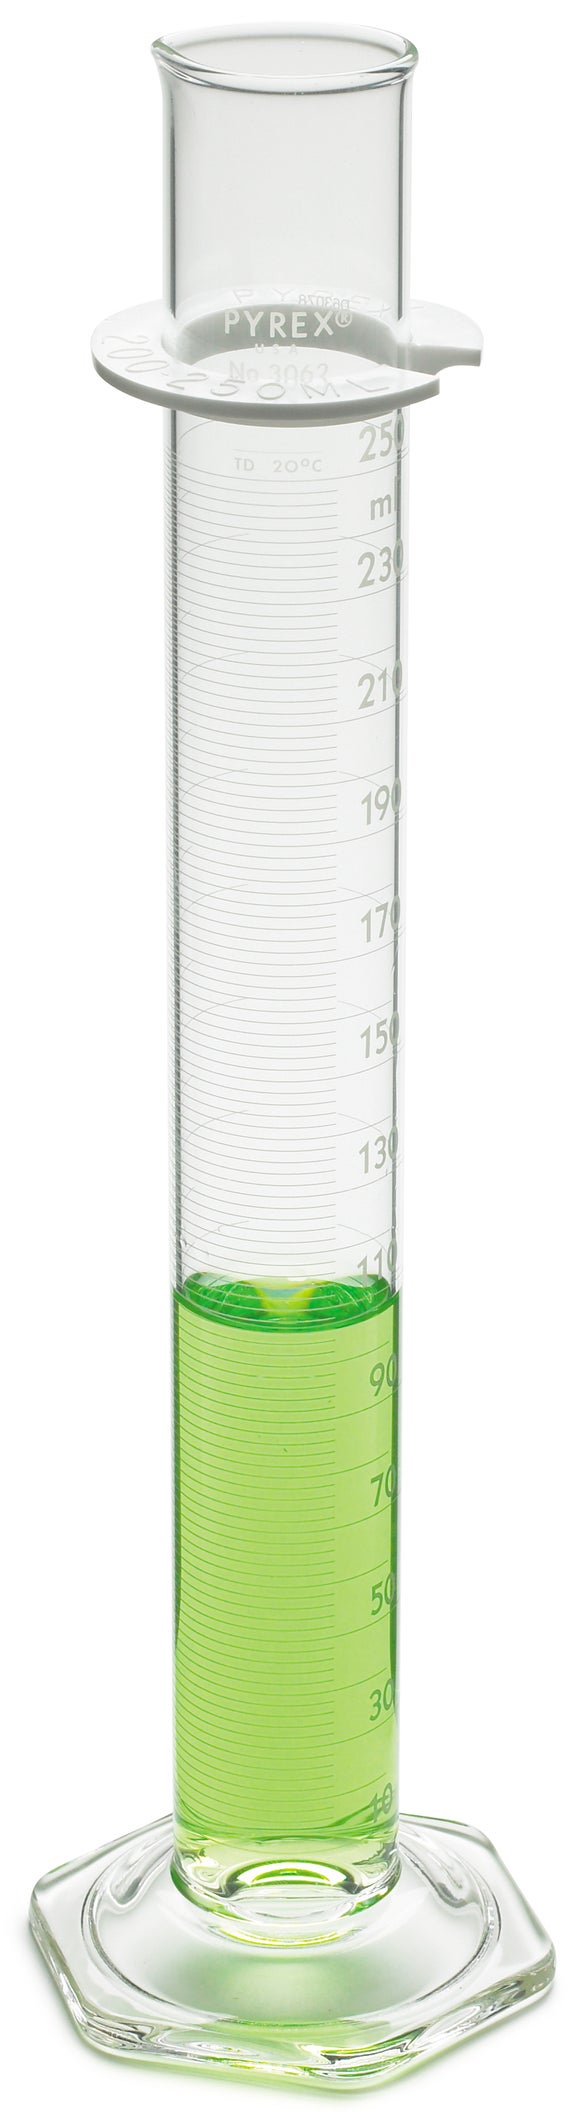 Cylinder, Graduated, 250 mL, Certified